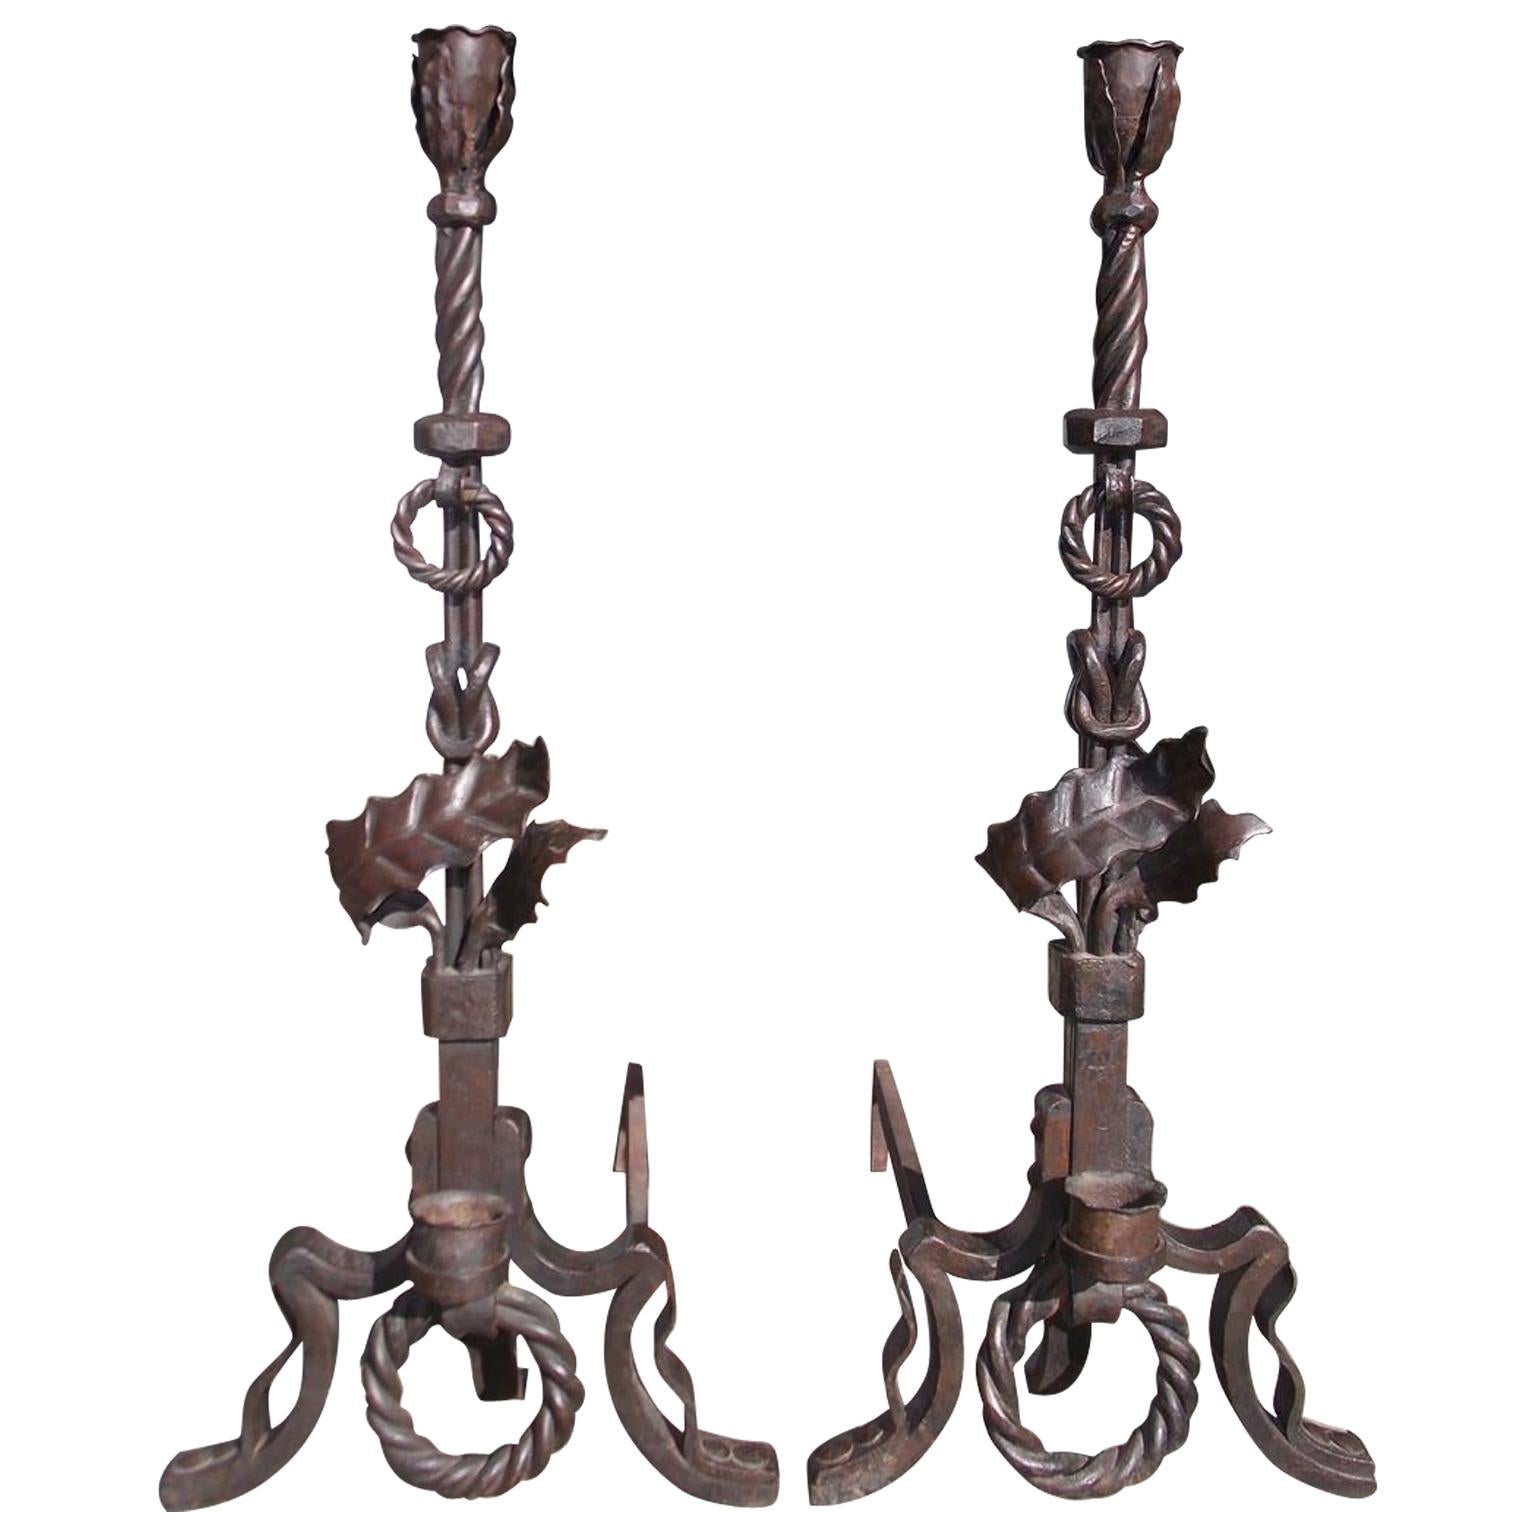 Pair of American Wrought Iron and Faux Painted Bronze Foliage Andirons, C. 1890